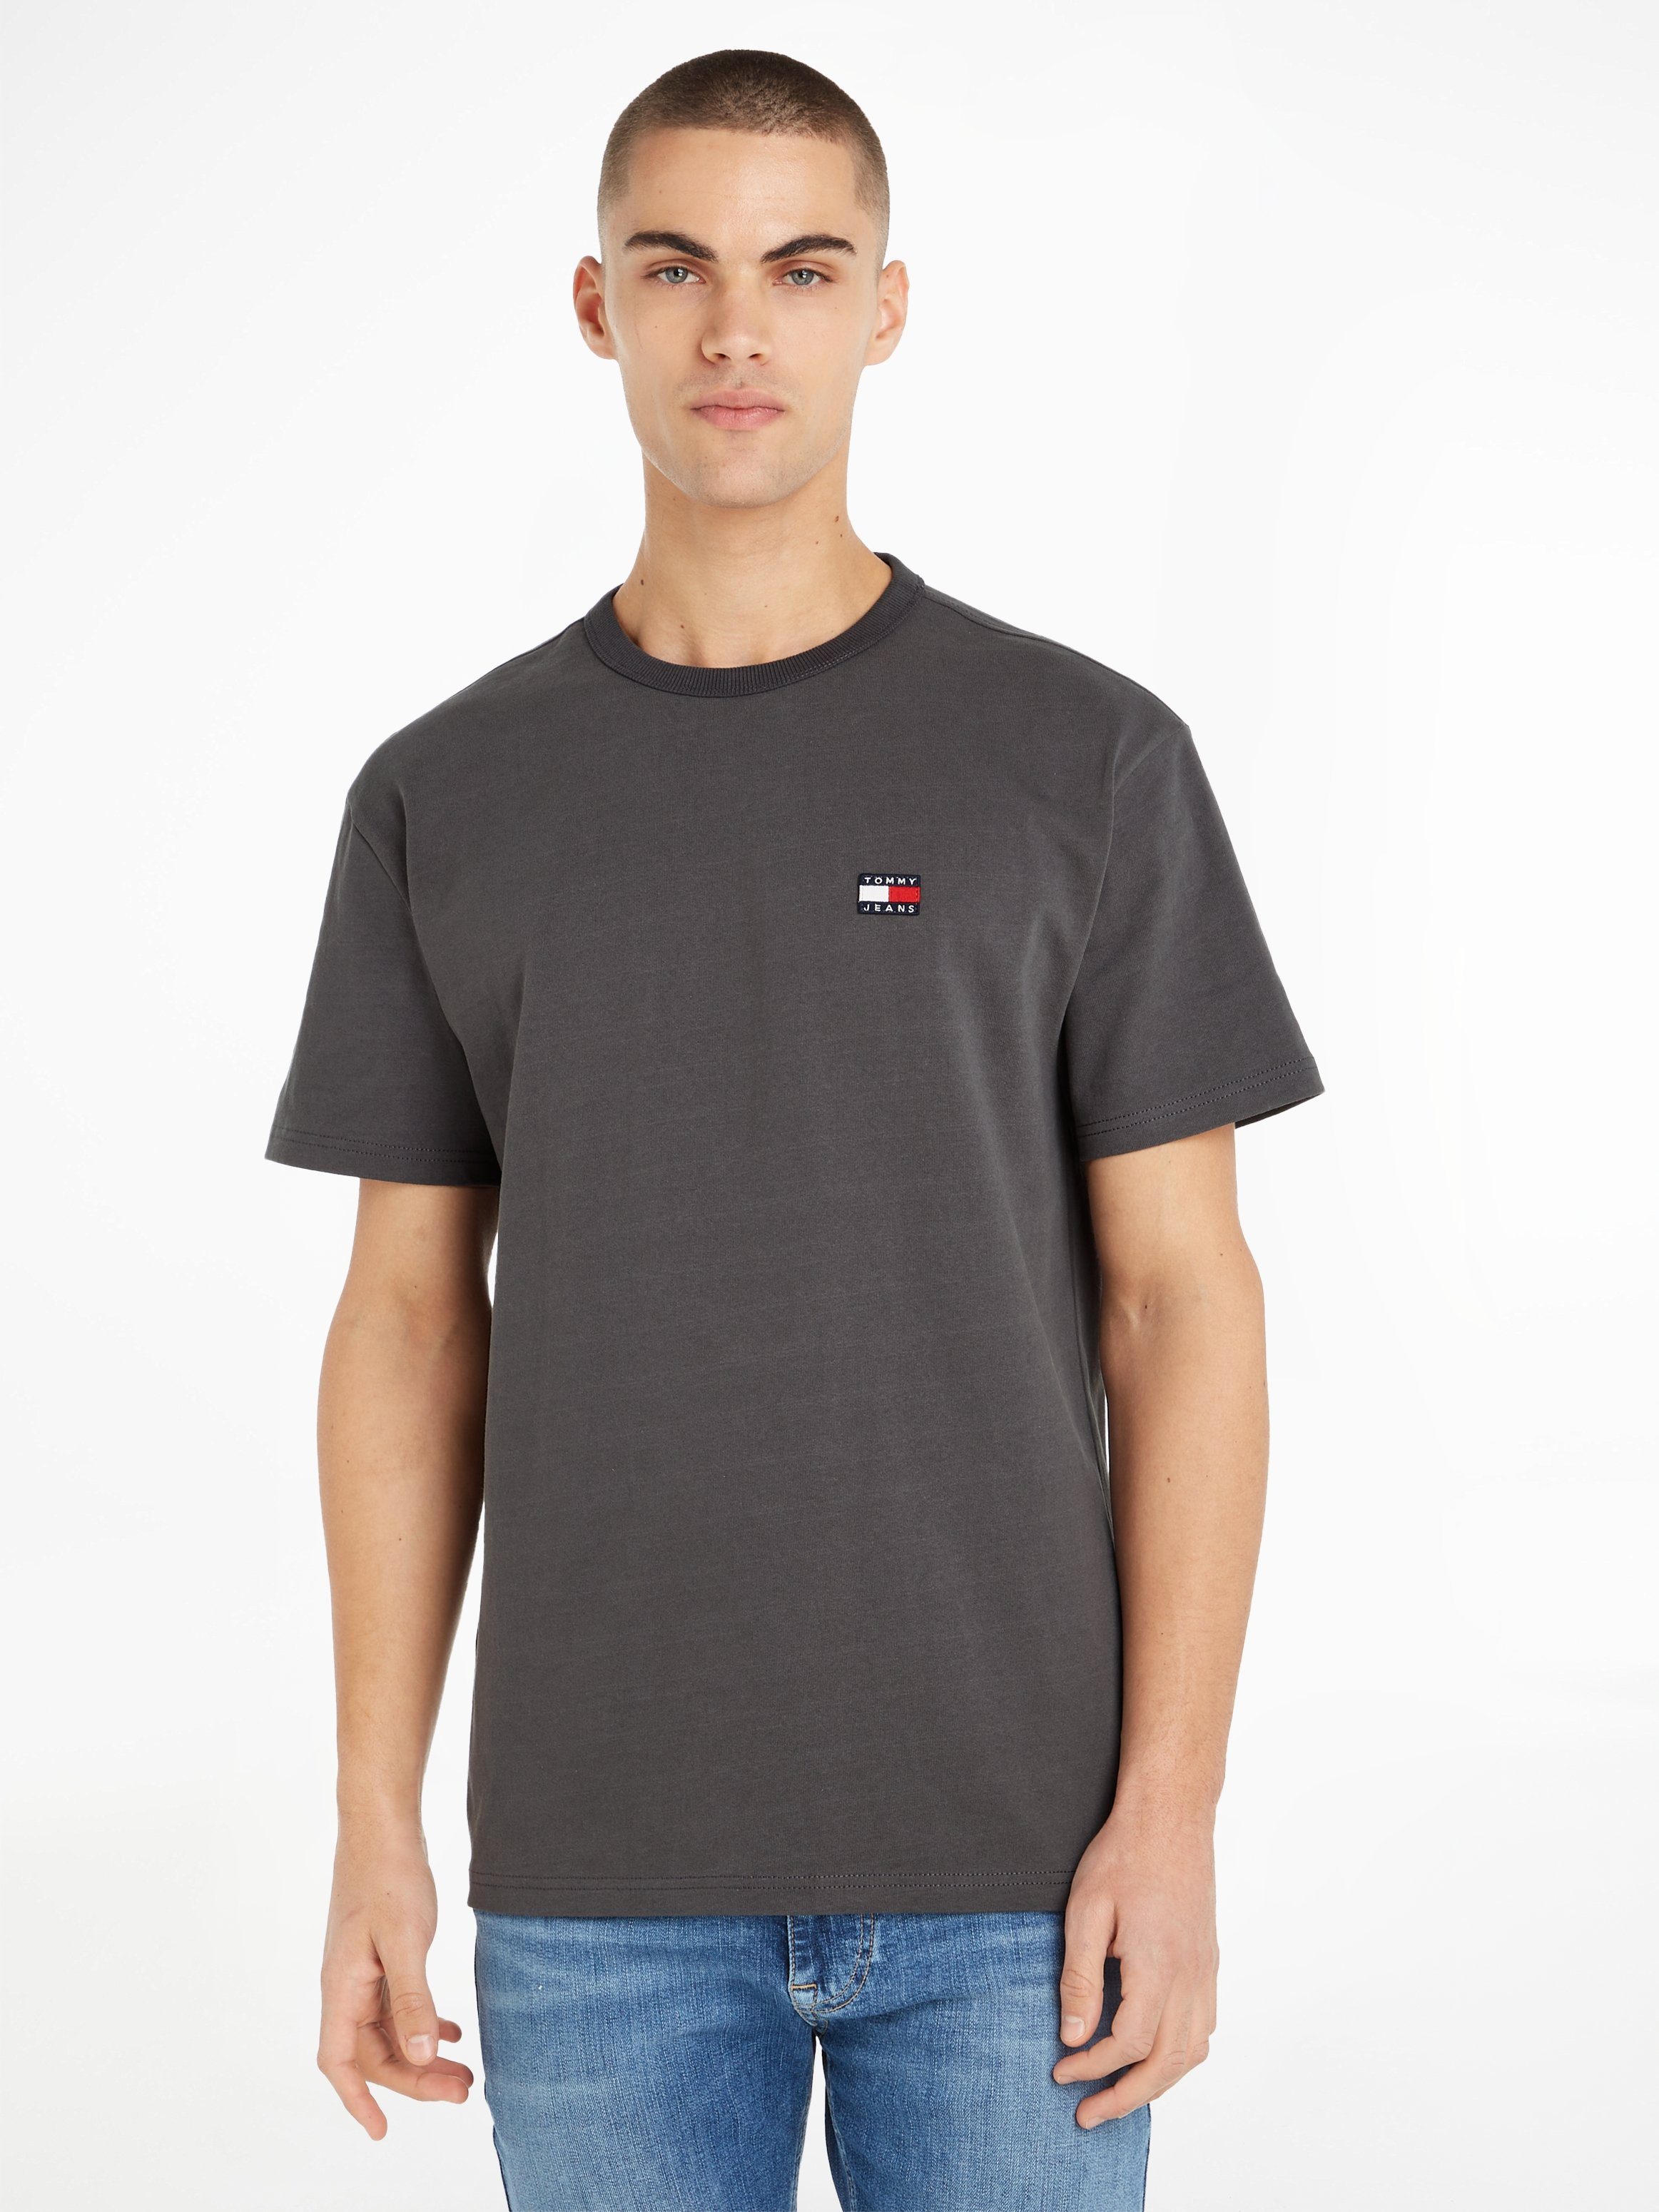 Charcoal CLSC New TJM T-Shirt TOMMY BADGE Tommy Jeans XS TEE